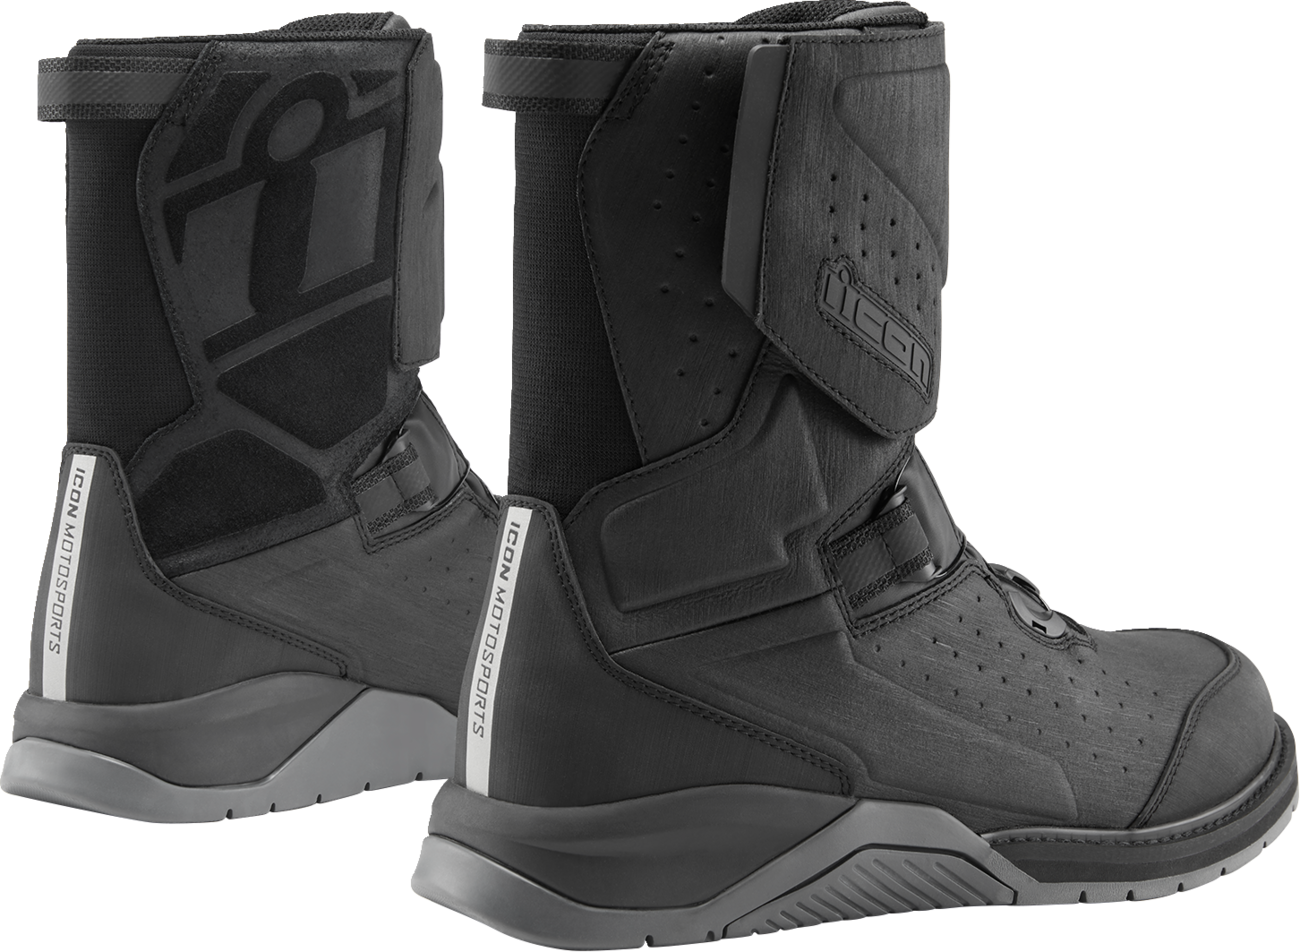 ICON Alcan Waterproof Boots - Black - Size 11.5 3403-1240